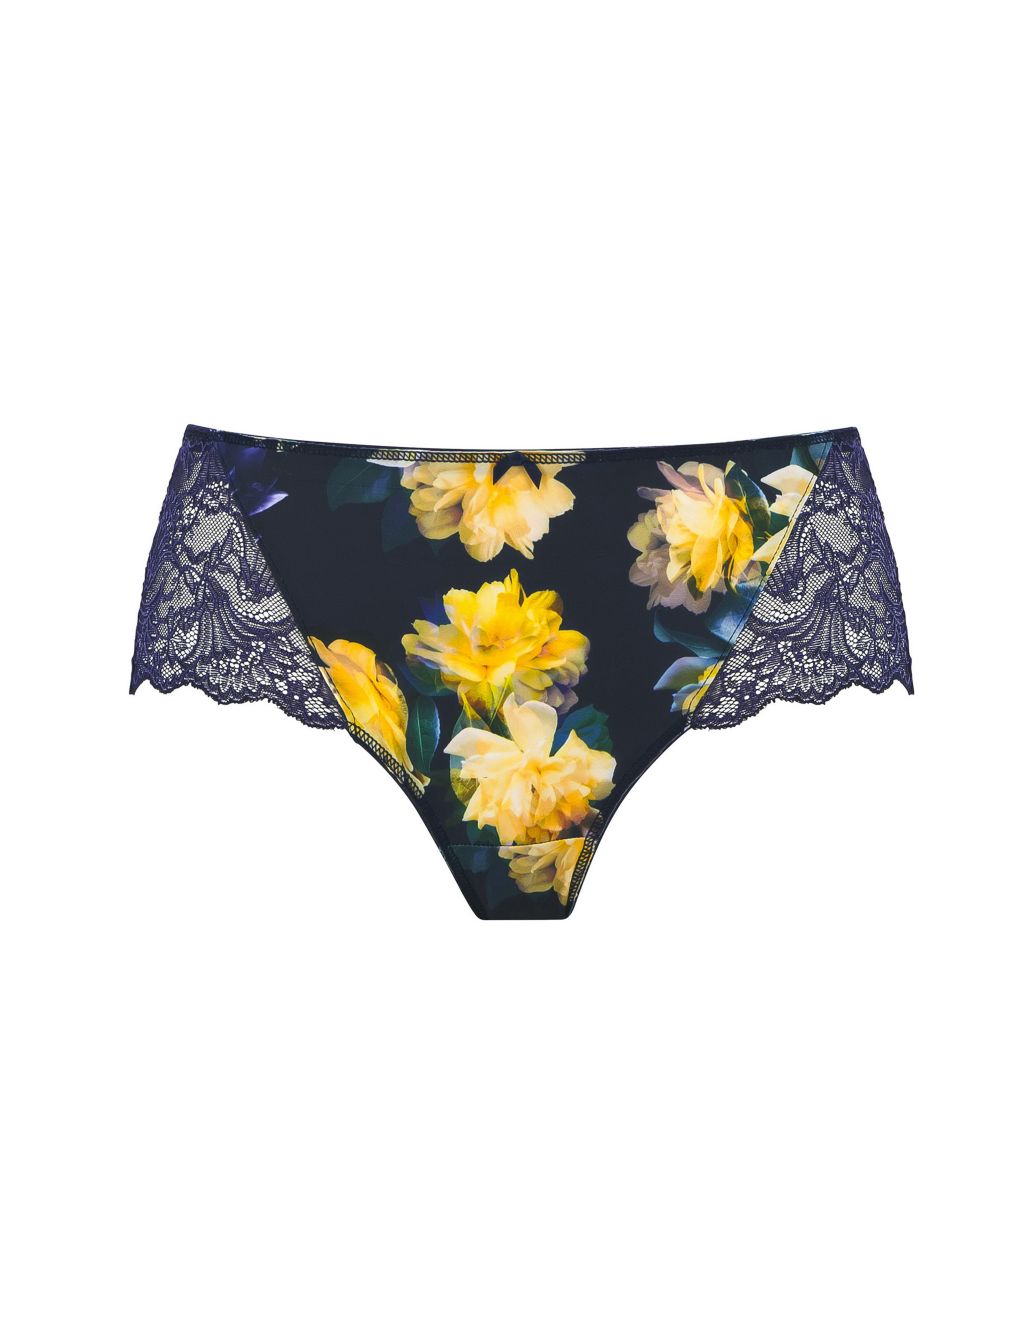 Lucia Lace Floral Knicker Shorts image 2